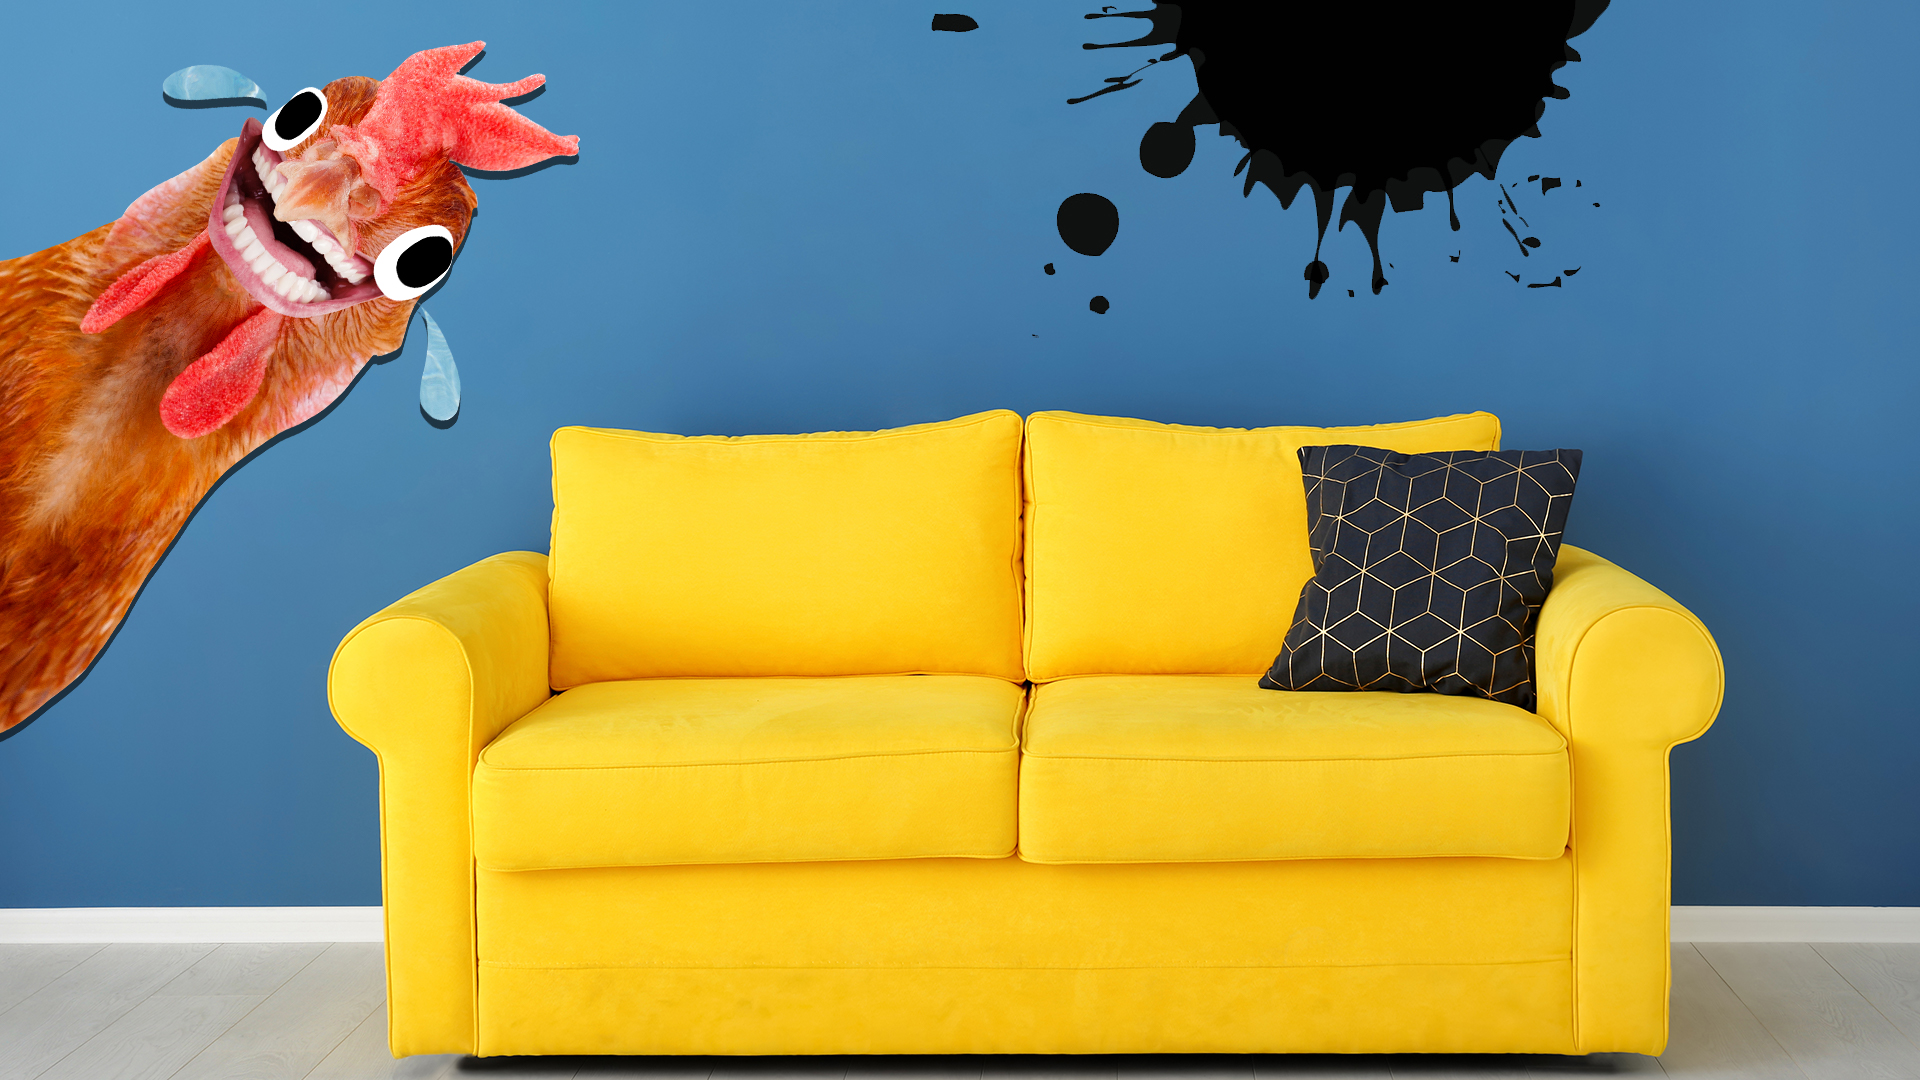 A chicken laughs at a brightly-coloured sofa